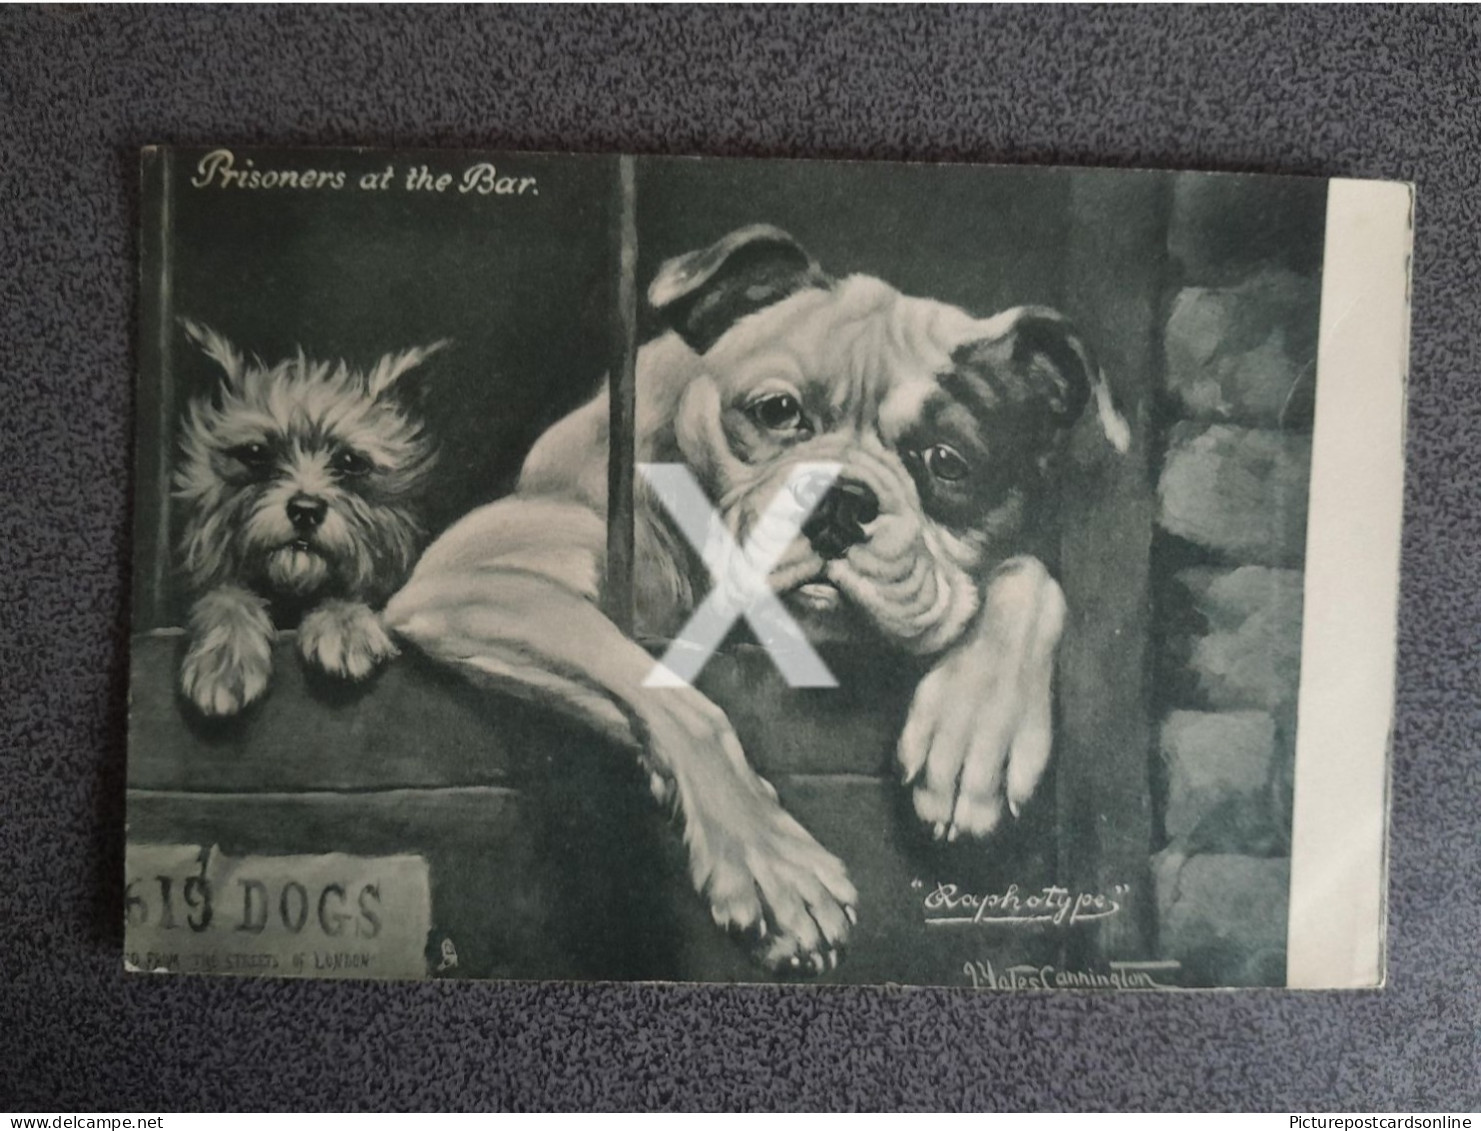 PRISONERS AT THE BAR West Highland Terrier & Bulldog  OLD B/W POSTCARD TUCK RAPHOTYPE NO 2802 SIGNED J. YATES CARRINGTON - Chiens